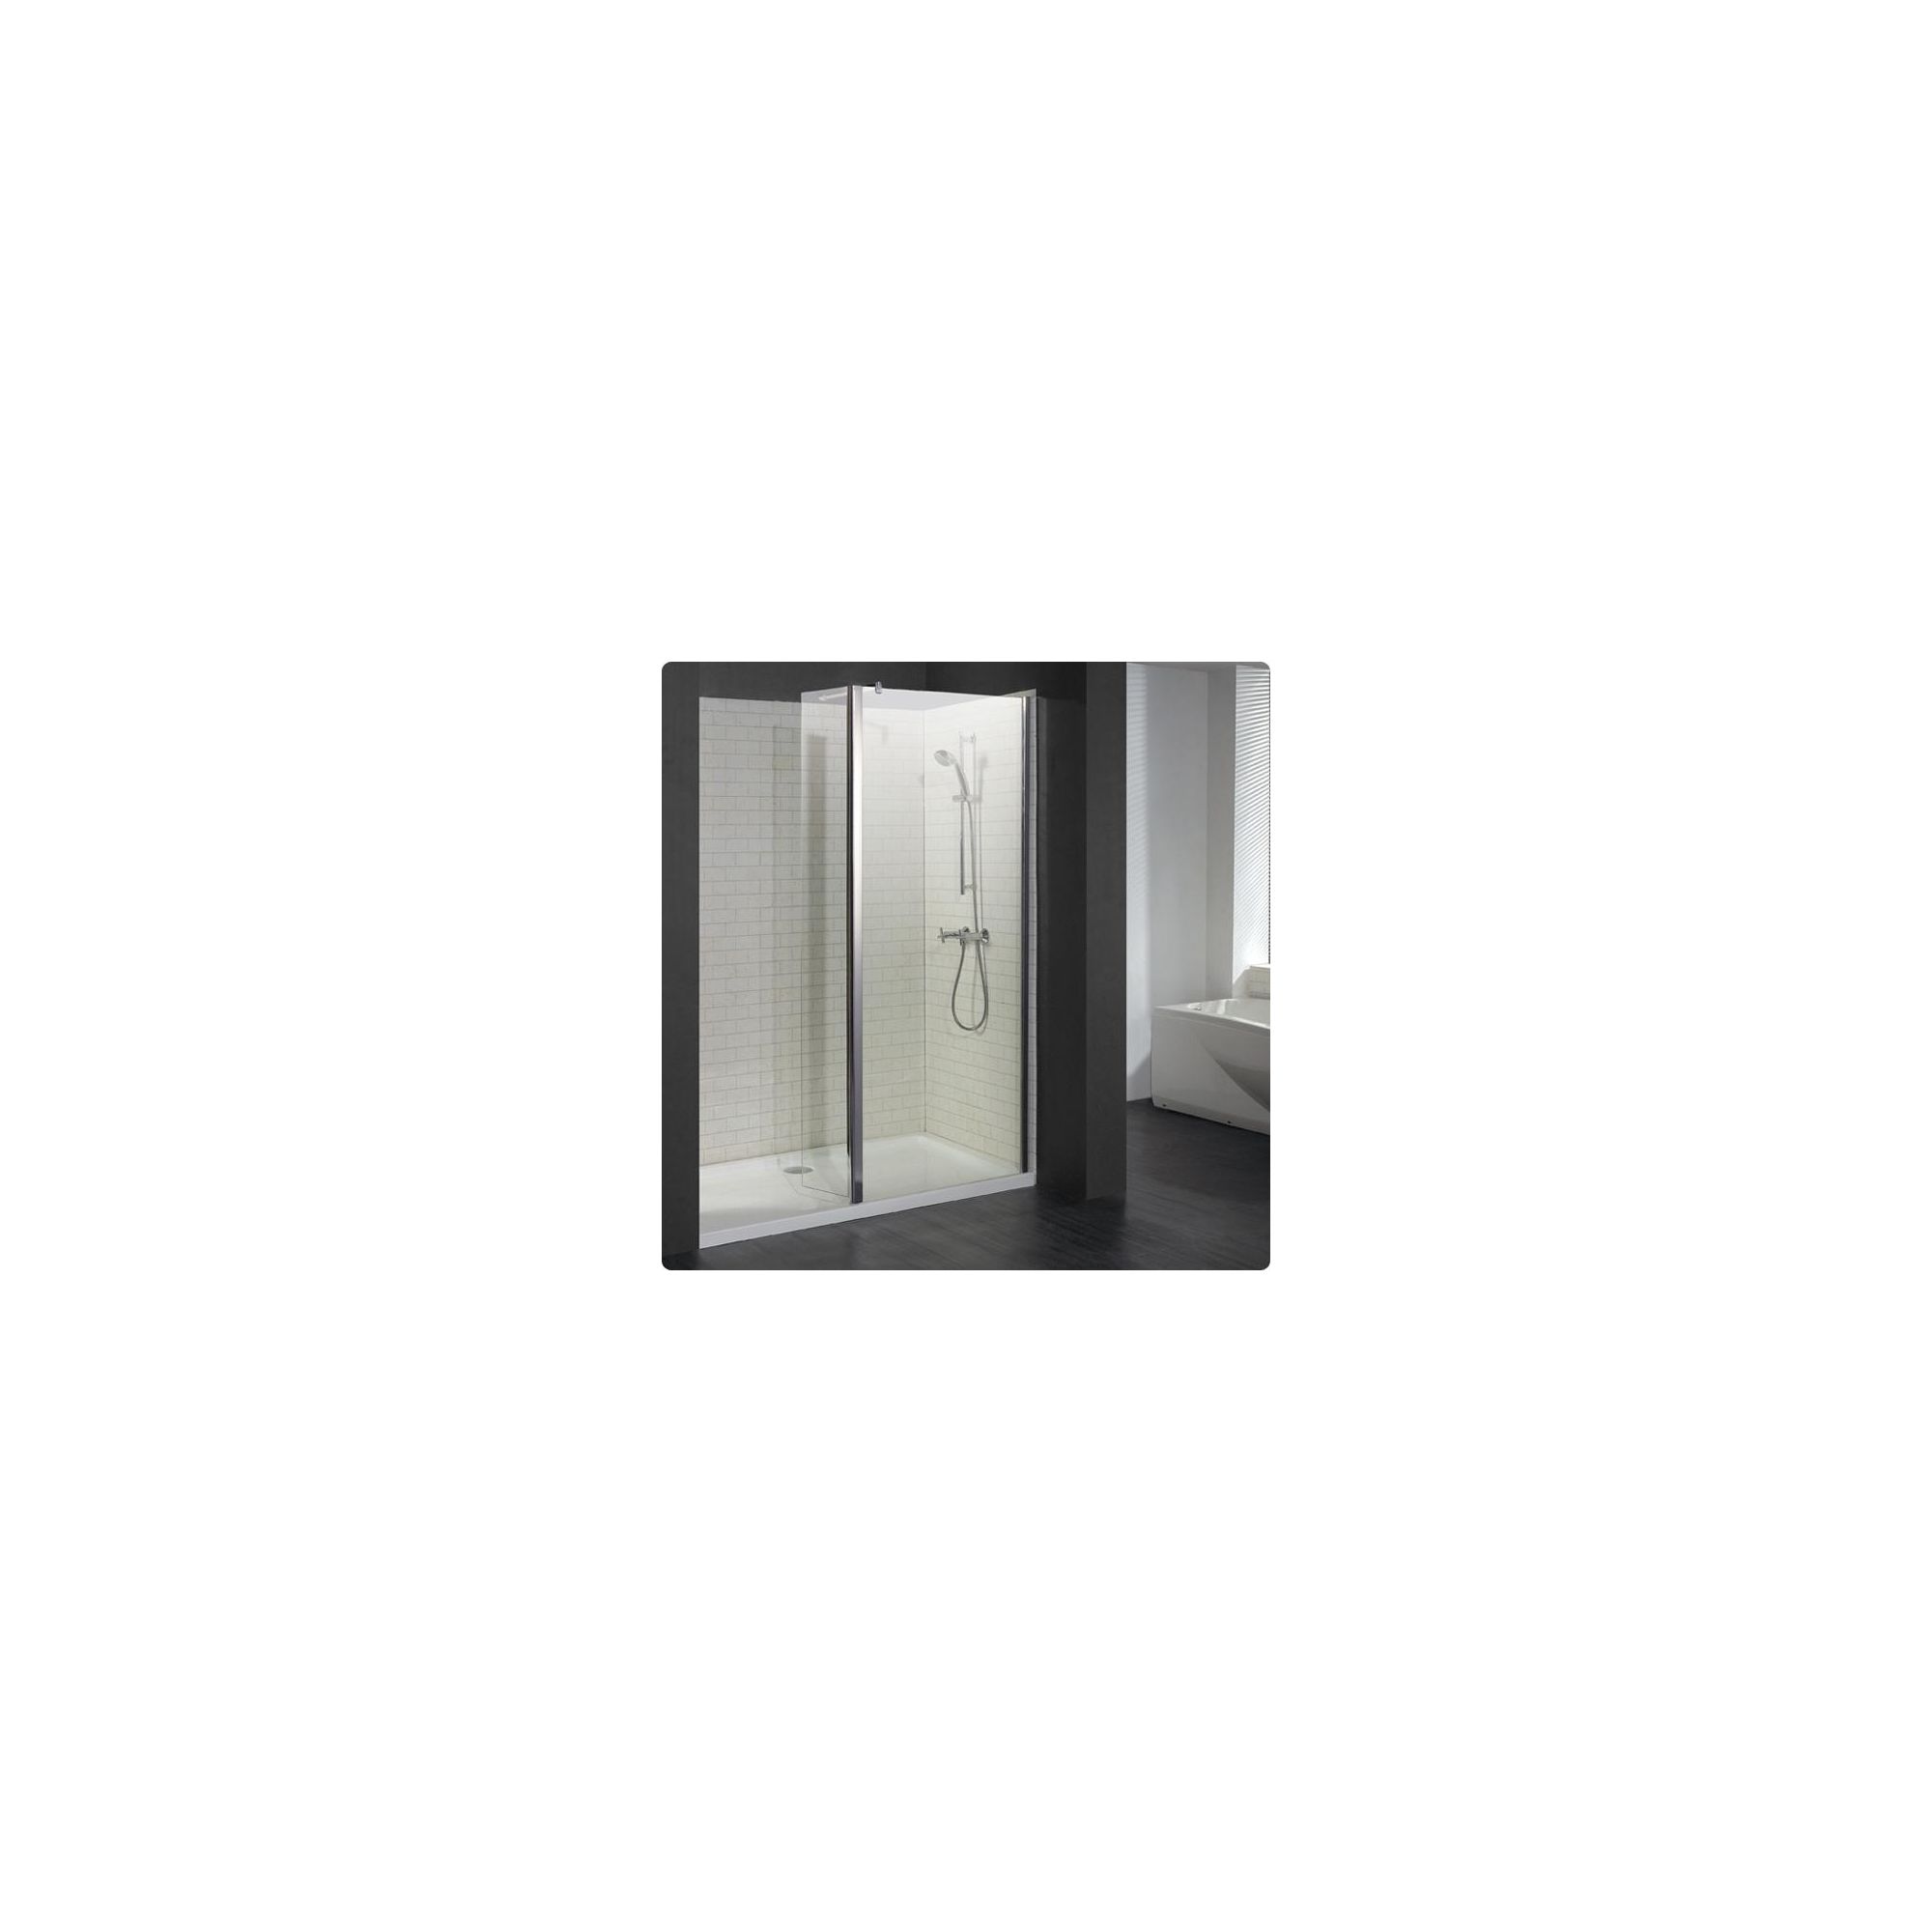 Duchy Choice Silver Walk-In Shower Enclosure 1500mm x 700mm (Complete with Tray), 6mm Glass at Tesco Direct